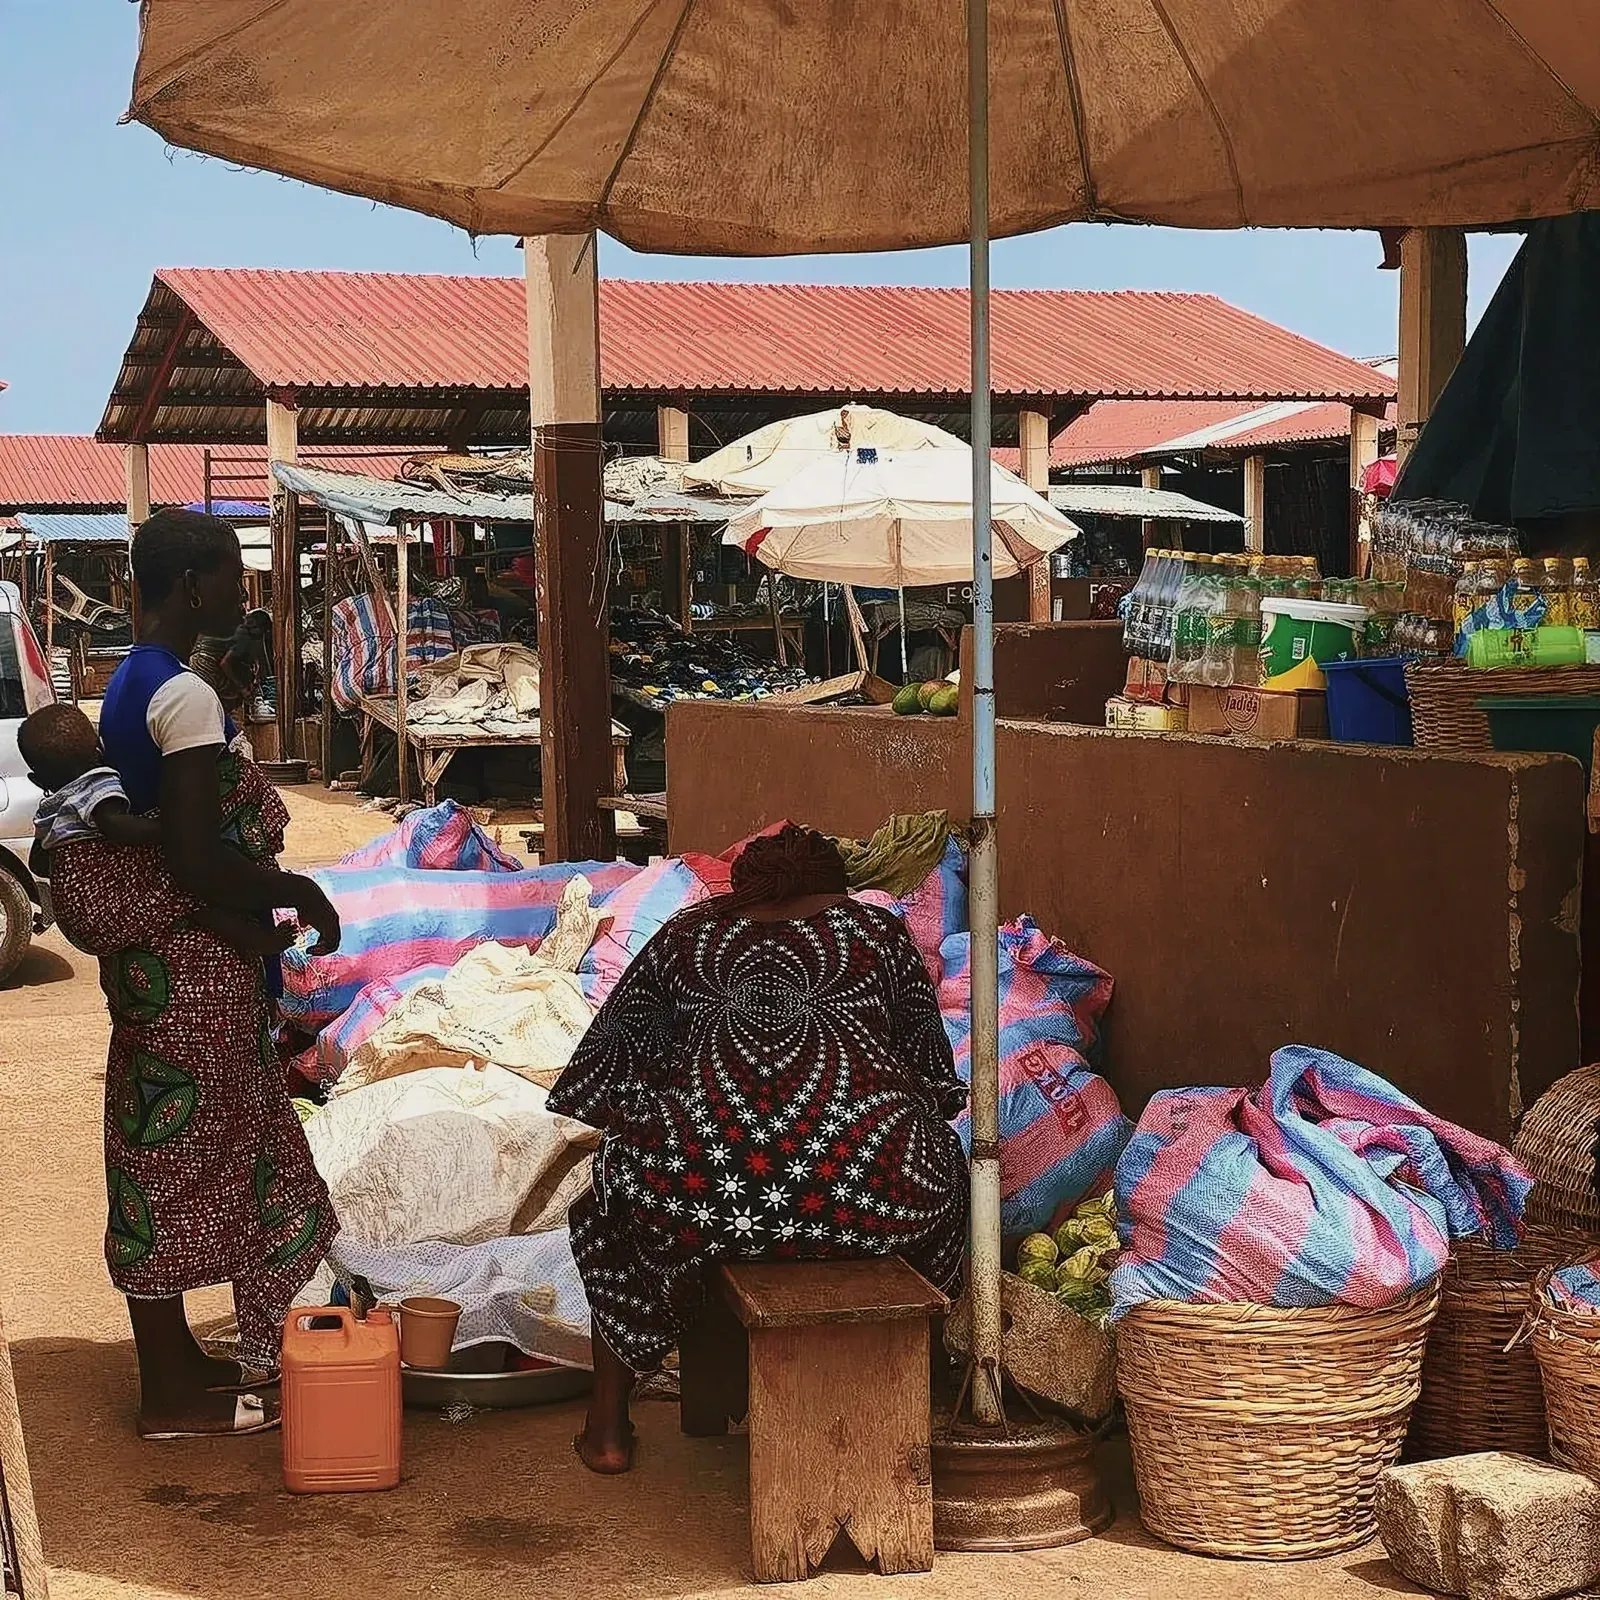 Vibrant hustle and bustle of an outdoor market in Togo